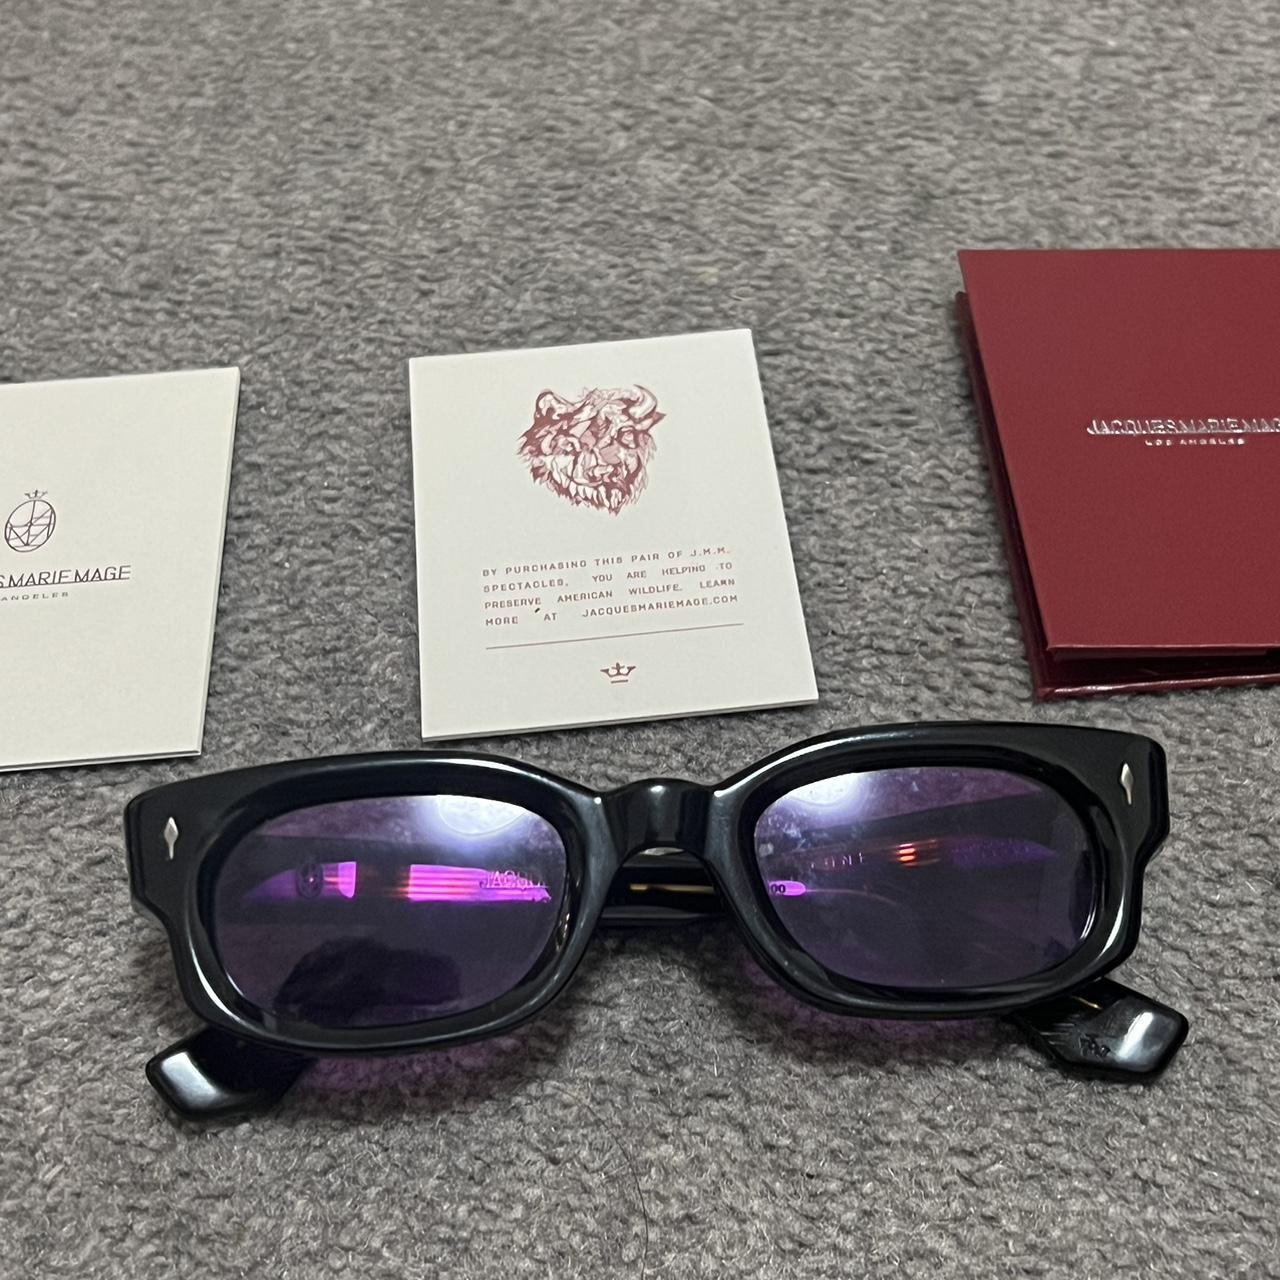 JACQUES MARIE MAGE WHISKEYCLONE SUNGLASSES Rrp 925 - Depop